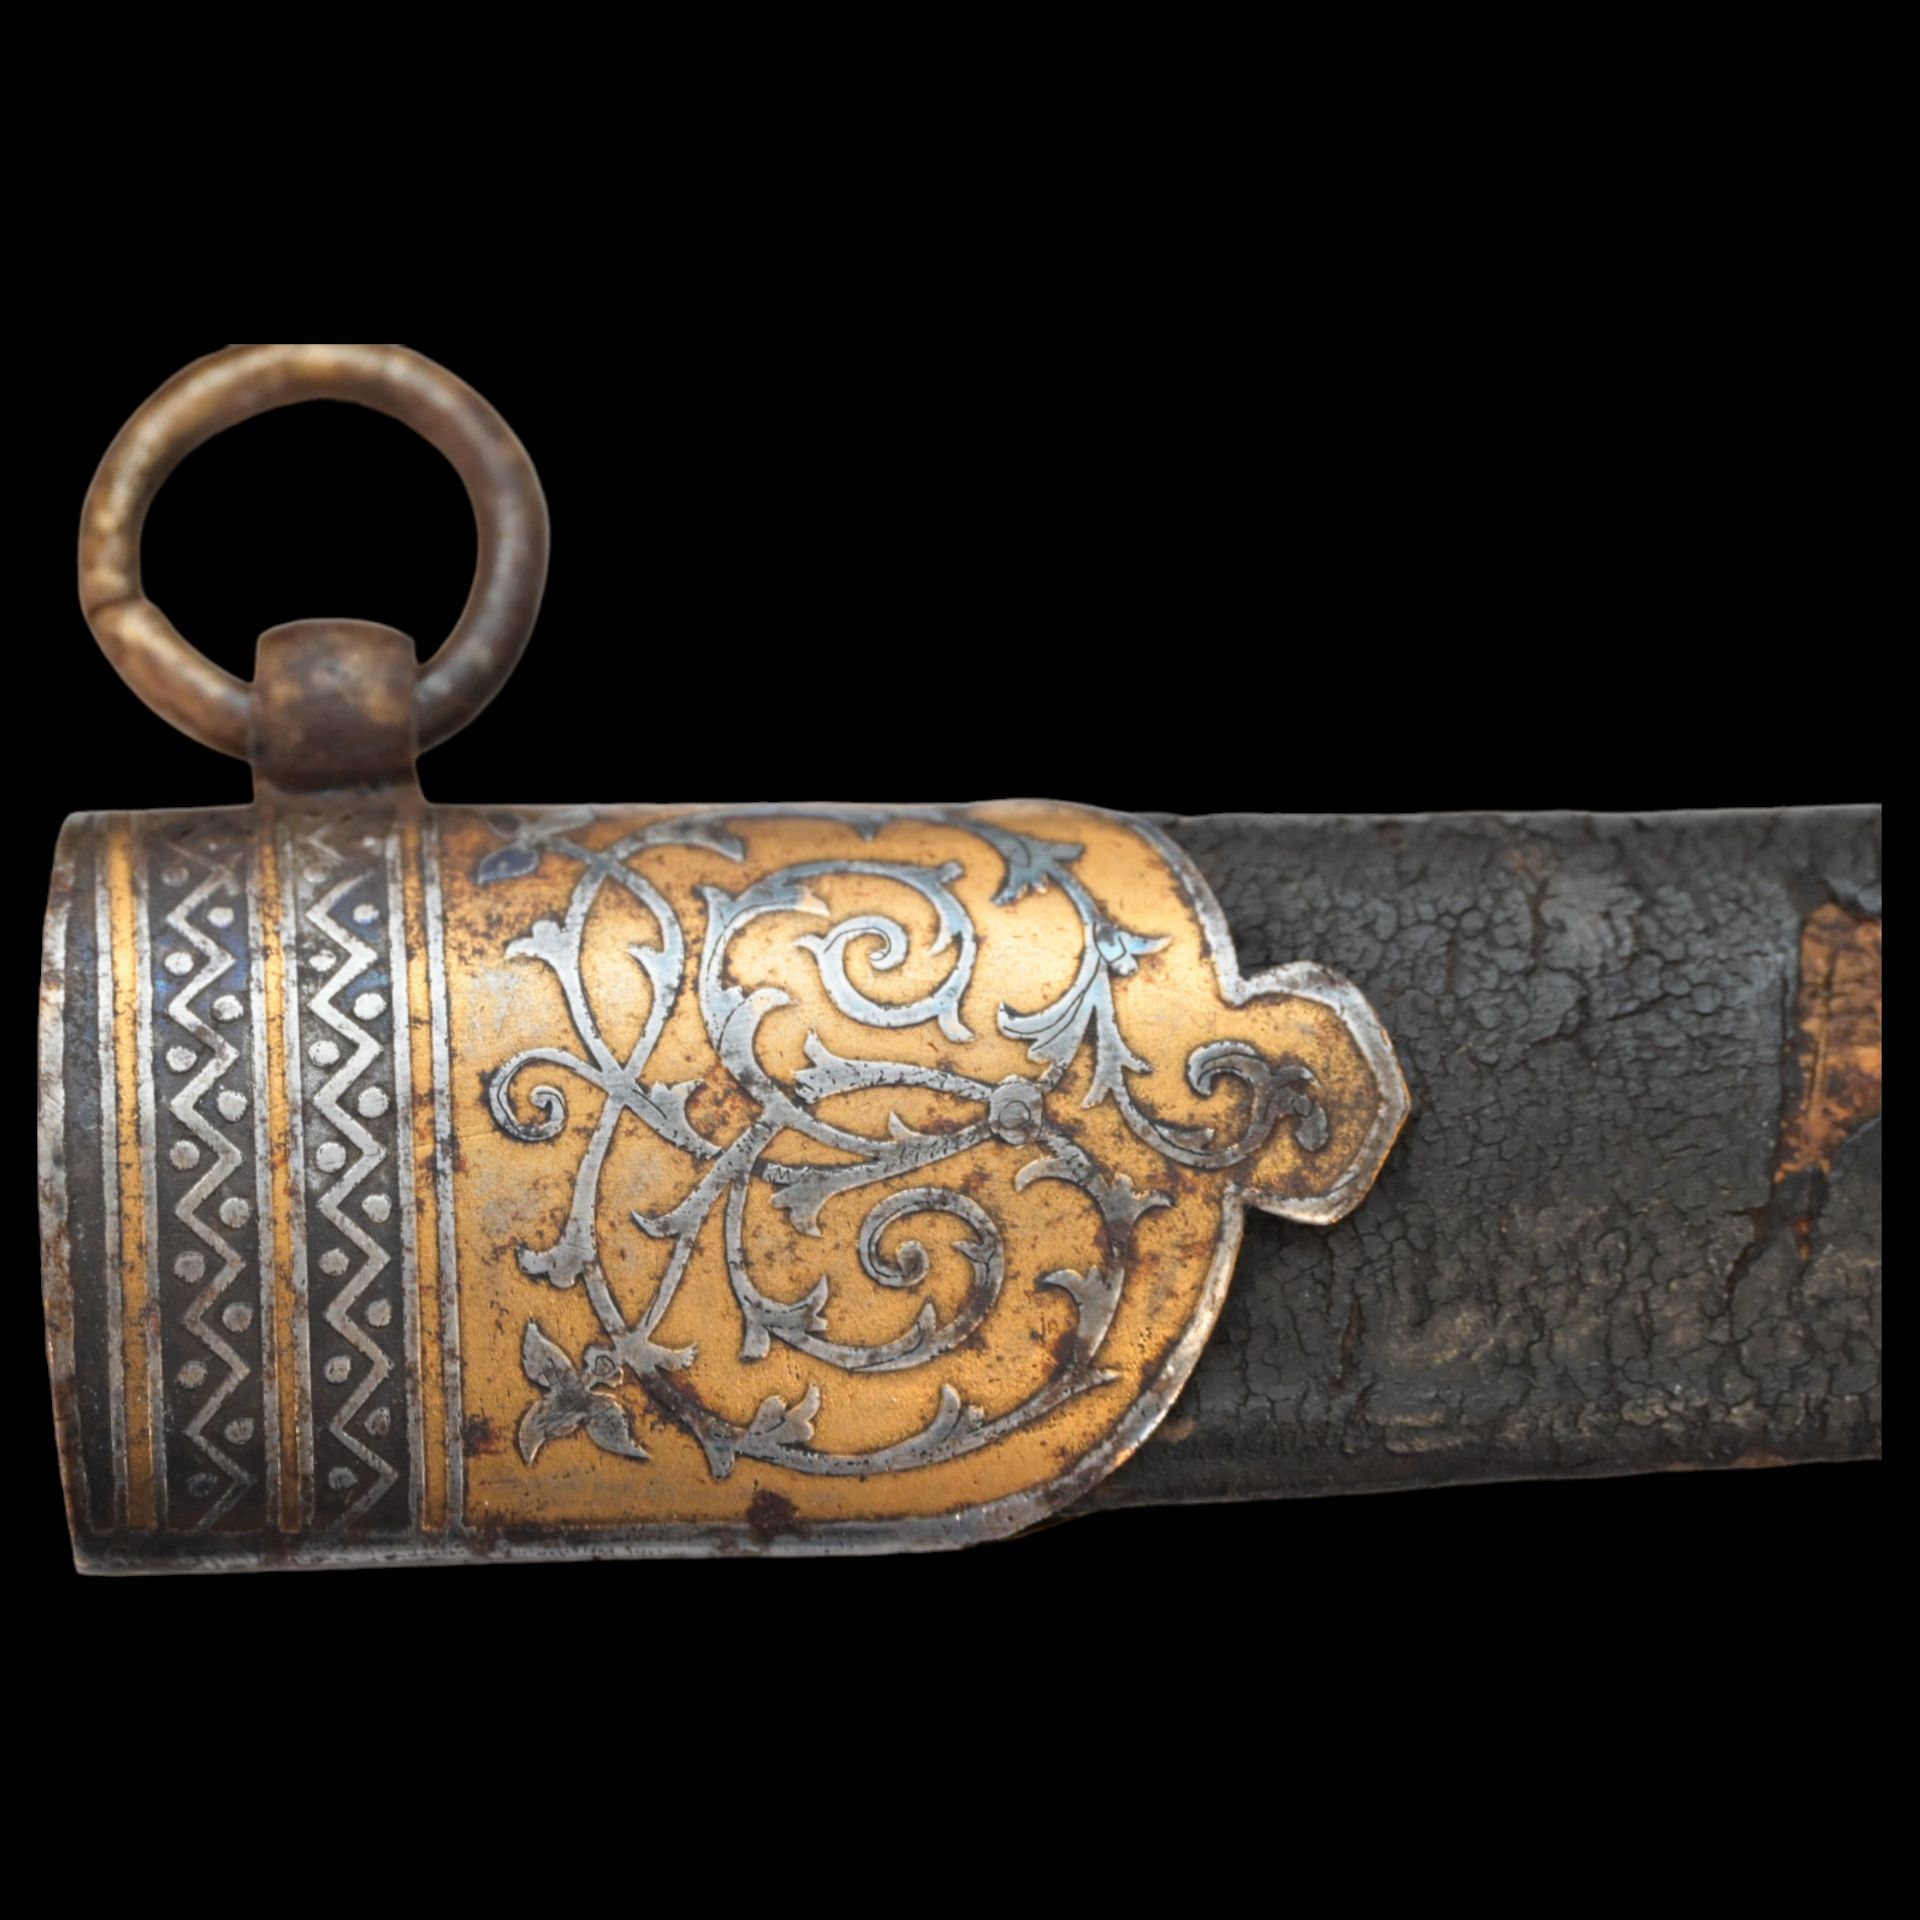 RARE HUNTING KNIFE, DECORATED WITH GOLD AND BLUE, RUSSIAN EMPIRE, ZLATOUST, 1889. - Image 20 of 26